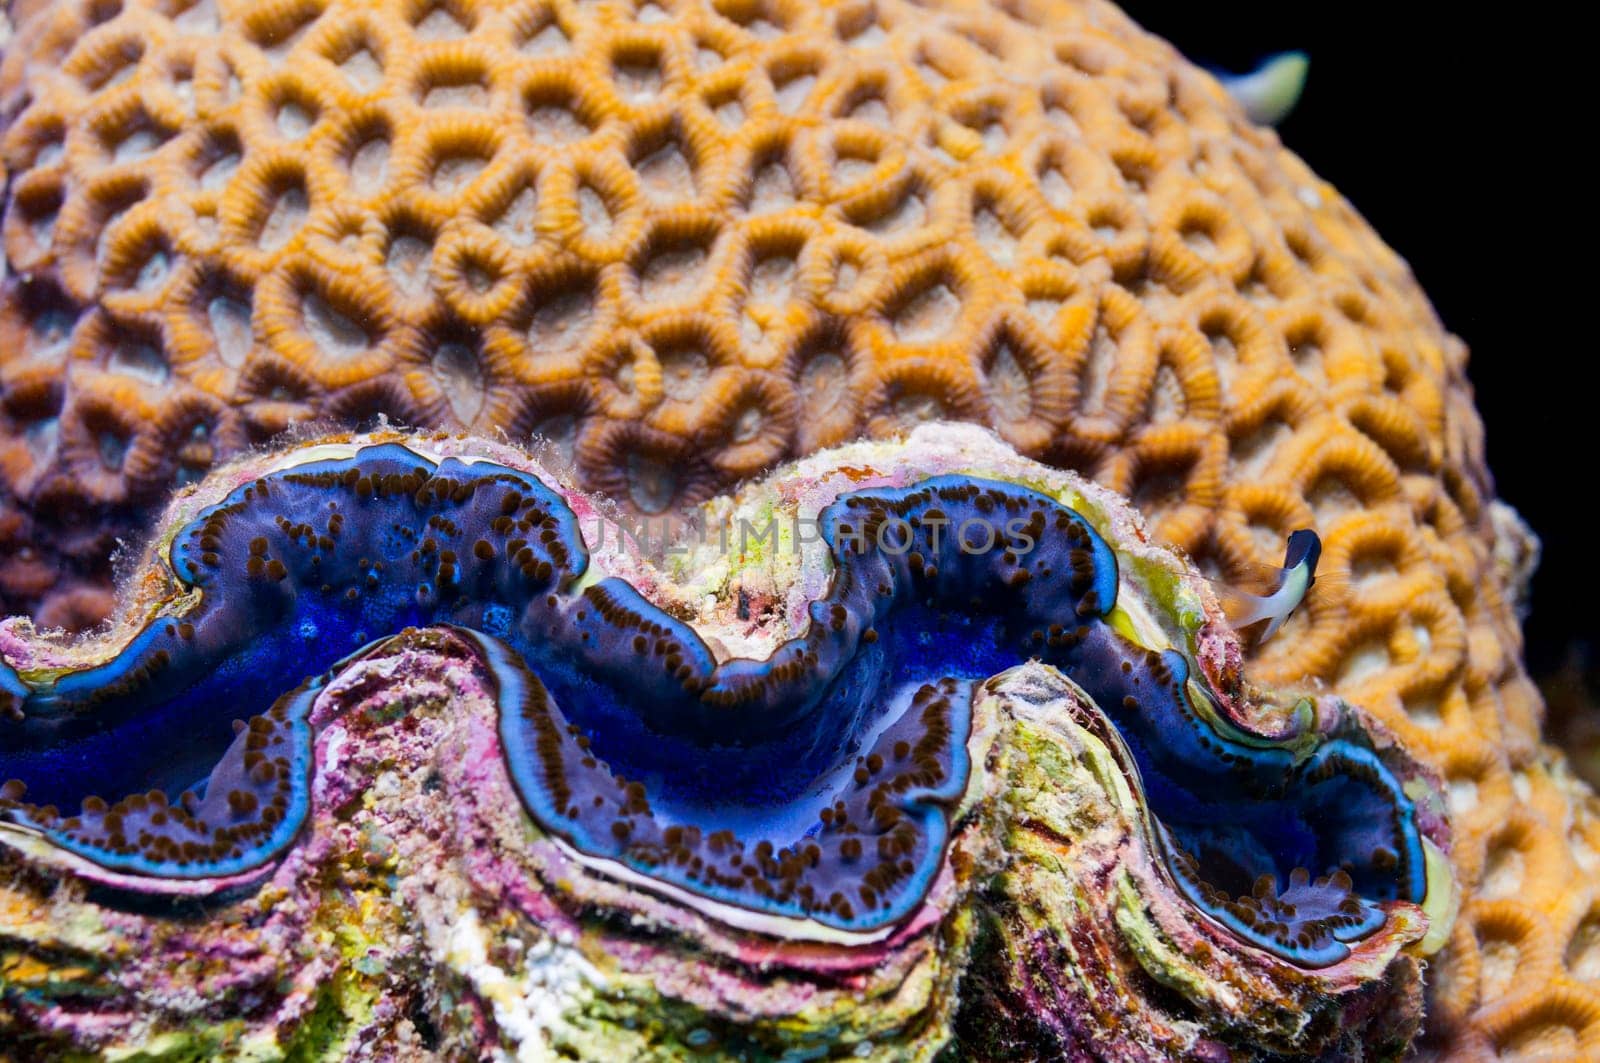 Red Sea blue giant clam close up portrait